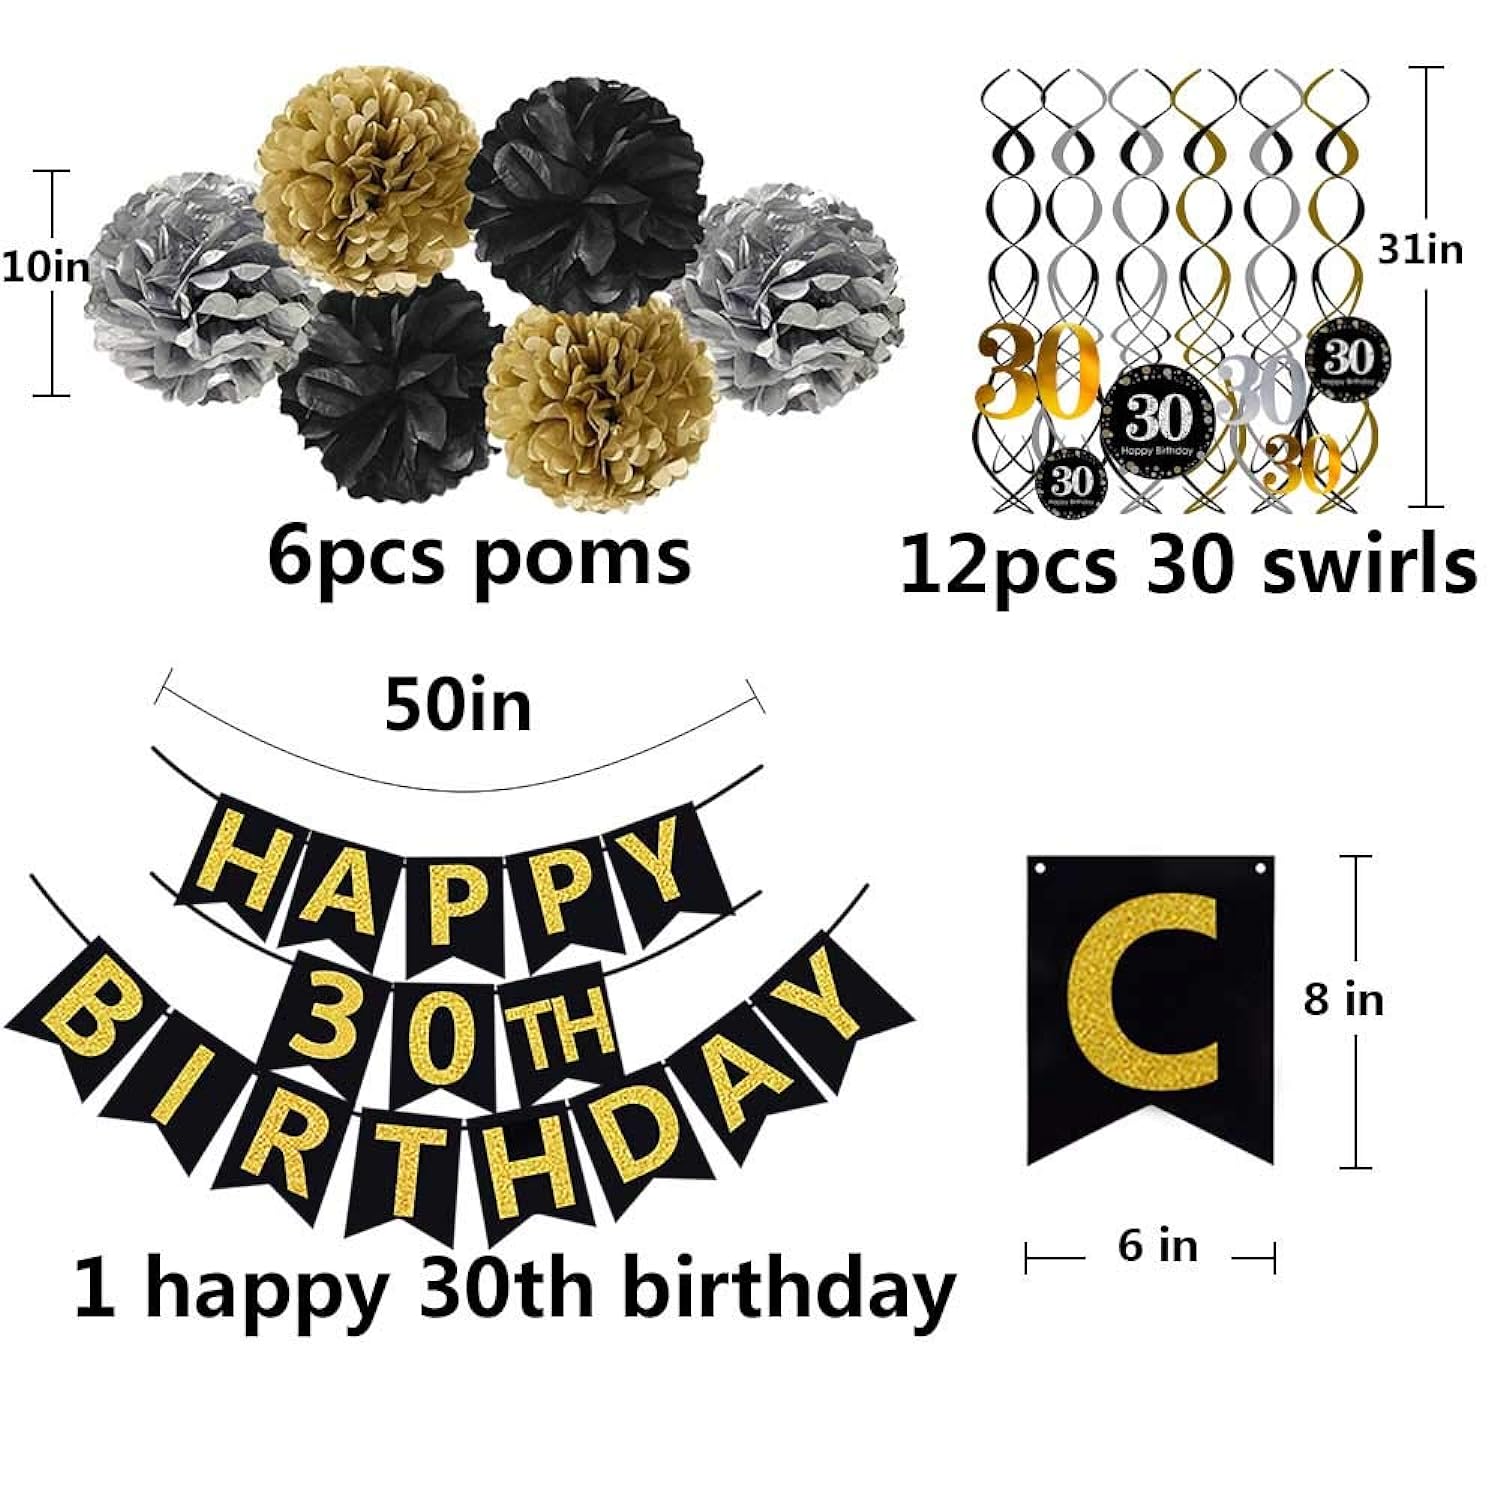 EBD Products Black & Gold Glittery Happy 30Th Birthday Banner,Poms,Sparkling 30 Hanging Swirls Kit For 30Th Birth SEA8184293